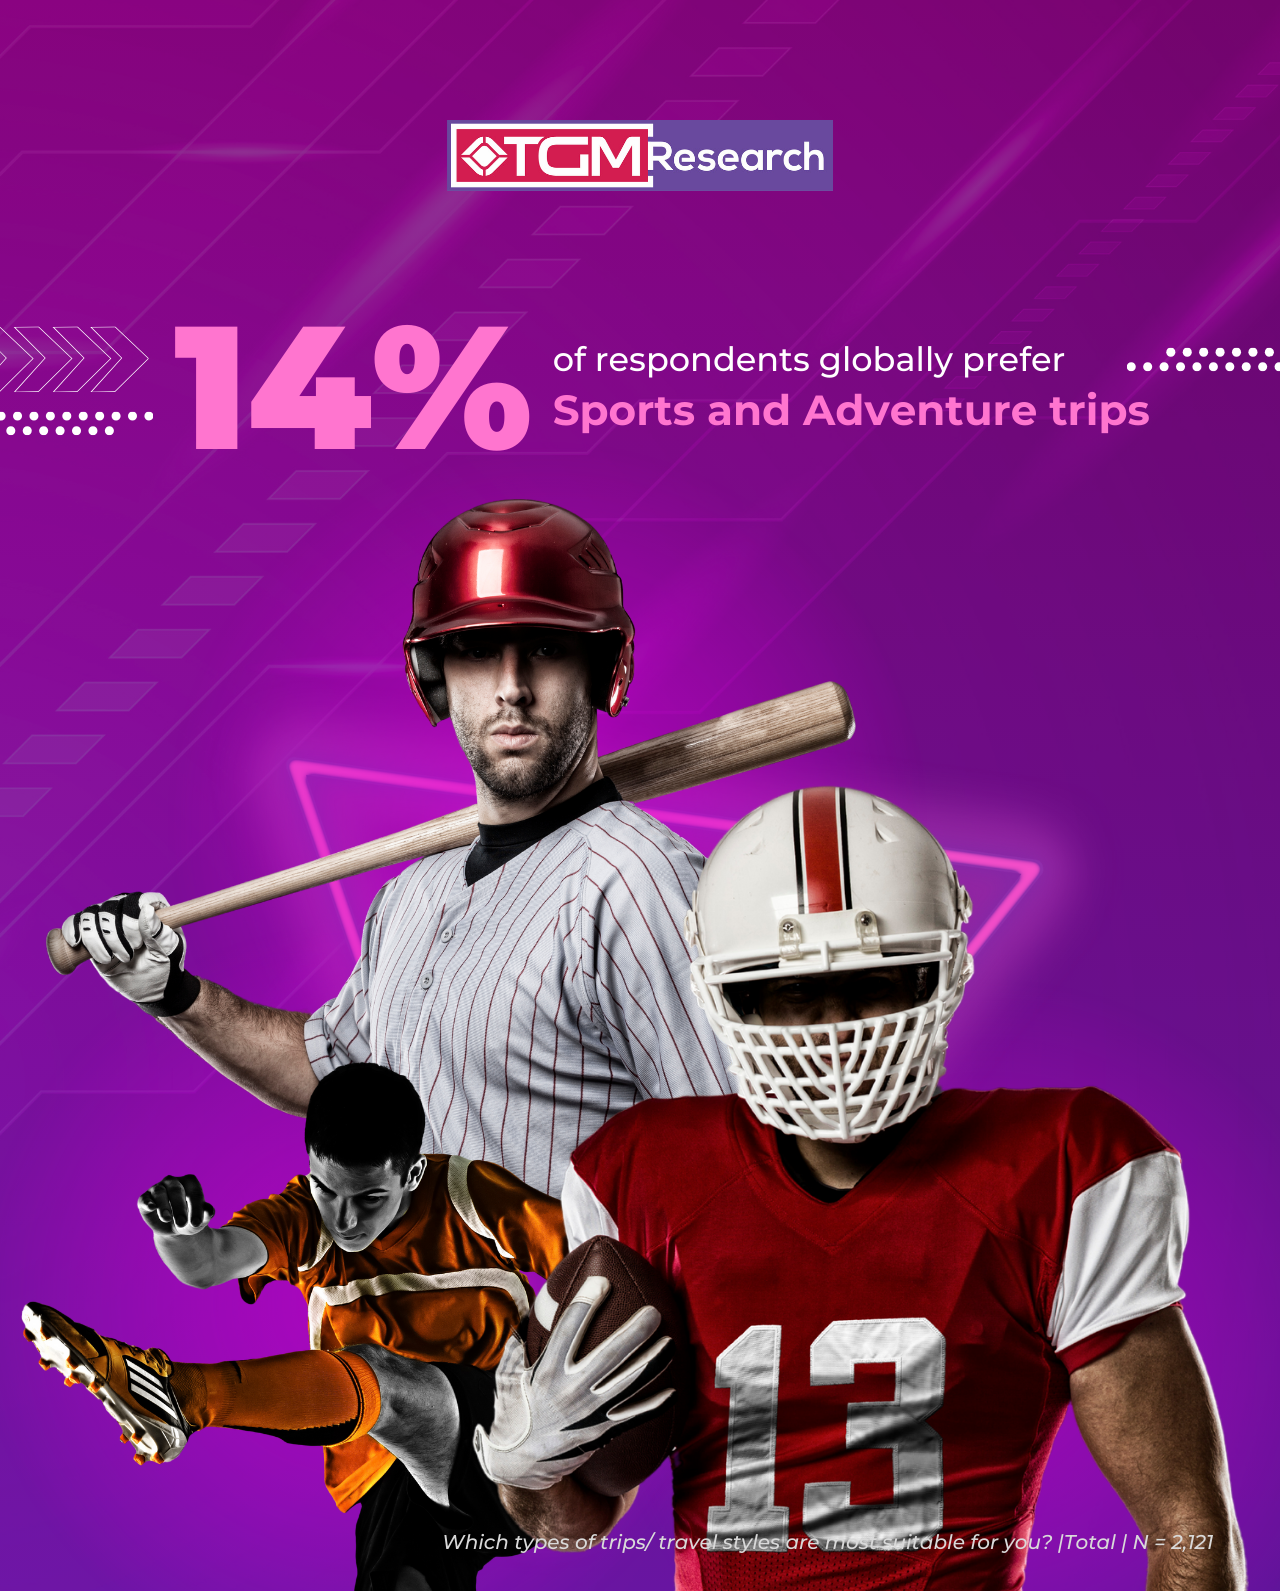 14% of respondents worldwide lean towards Sports and Adventure trips